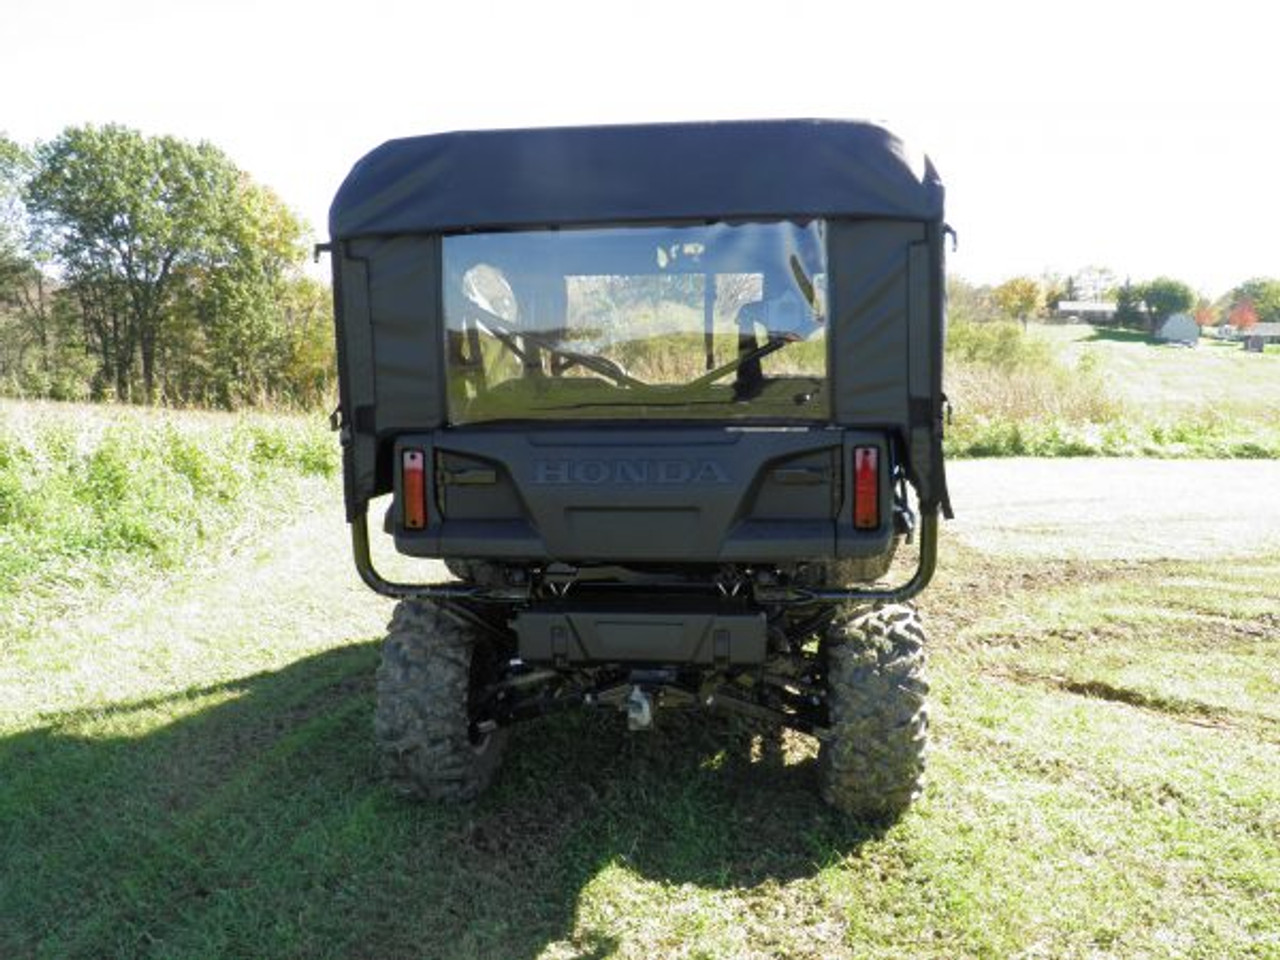 Honda Pioneer 1000-5 and 1000-6 Full Cab Enclosure for Hard Windshield rear view